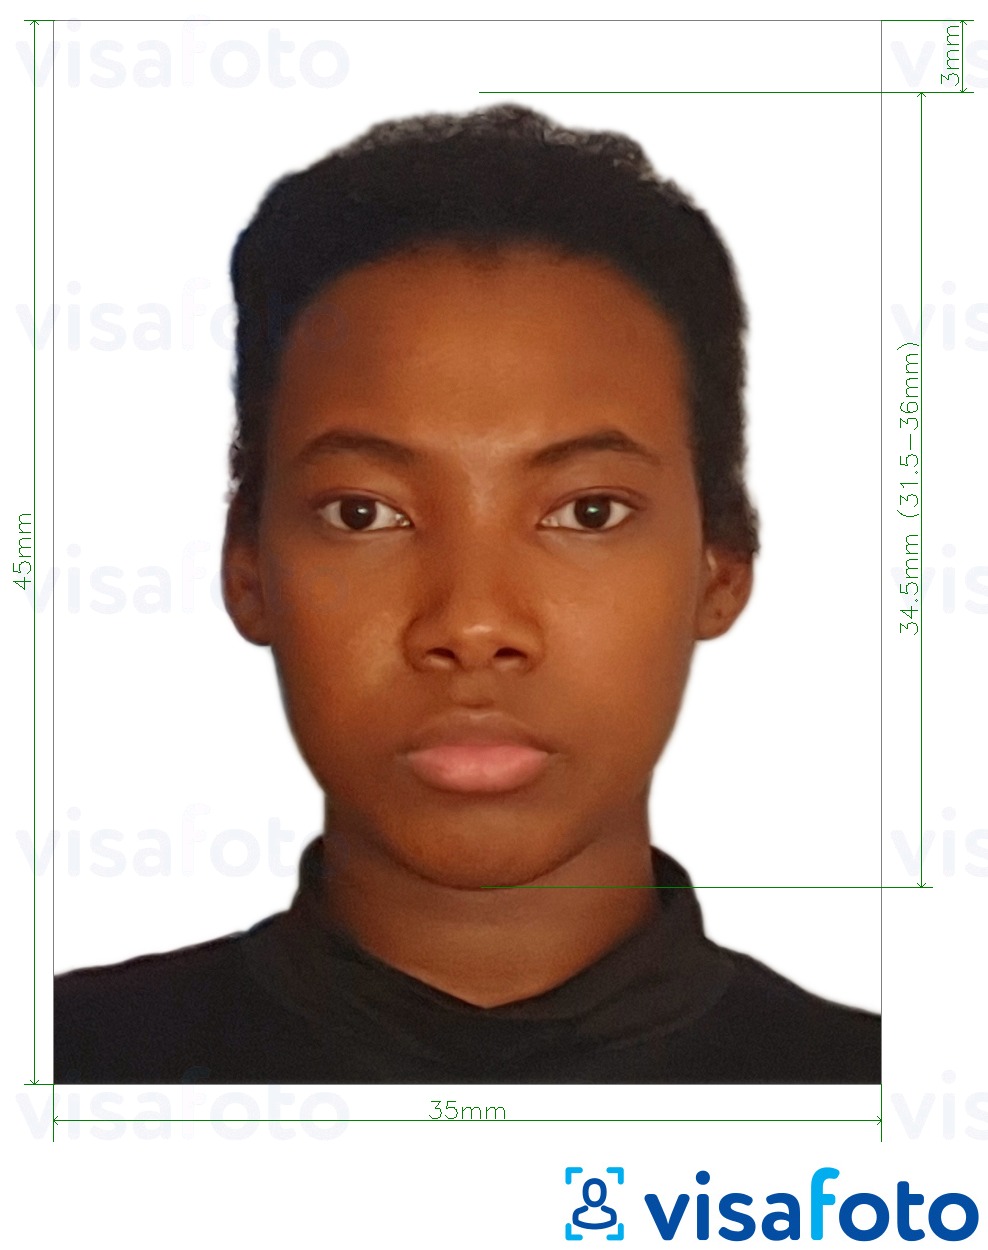 Example of photo for Democratic Republic of Congo passport 35x45 mm (3.5x4.5 cm) with exact size specification